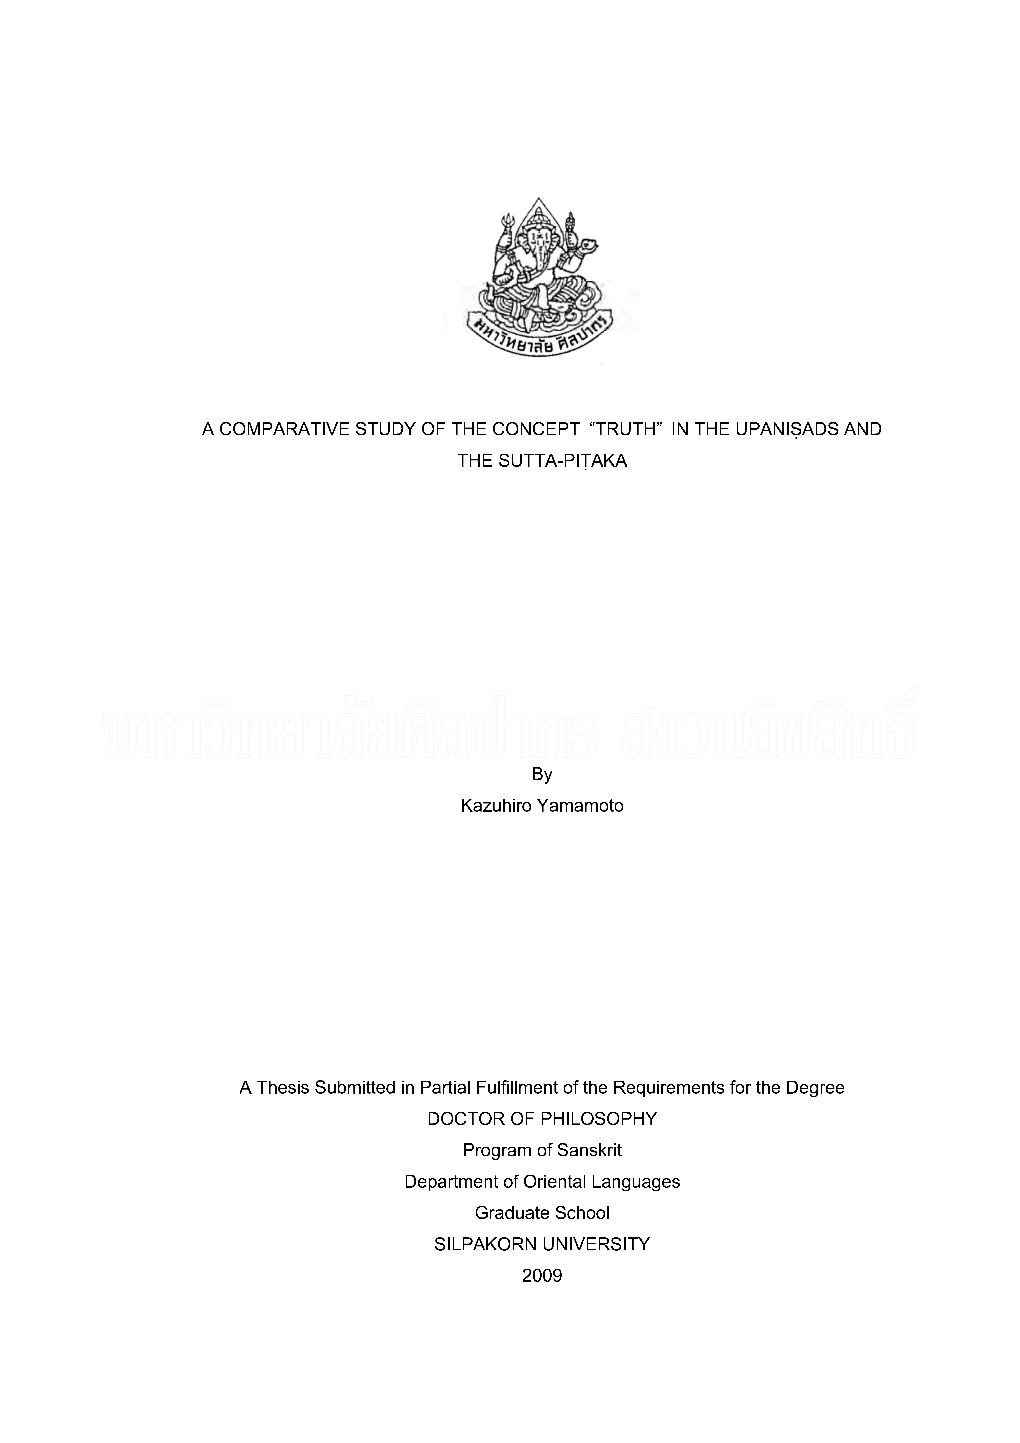 A COMPARATIVE STUDY of the CONCEPT “TRUTH” in the UPANIṢADS and the SUTTA-PIṬAKA by Kazuhiro Yamamoto a Thesis Submitted